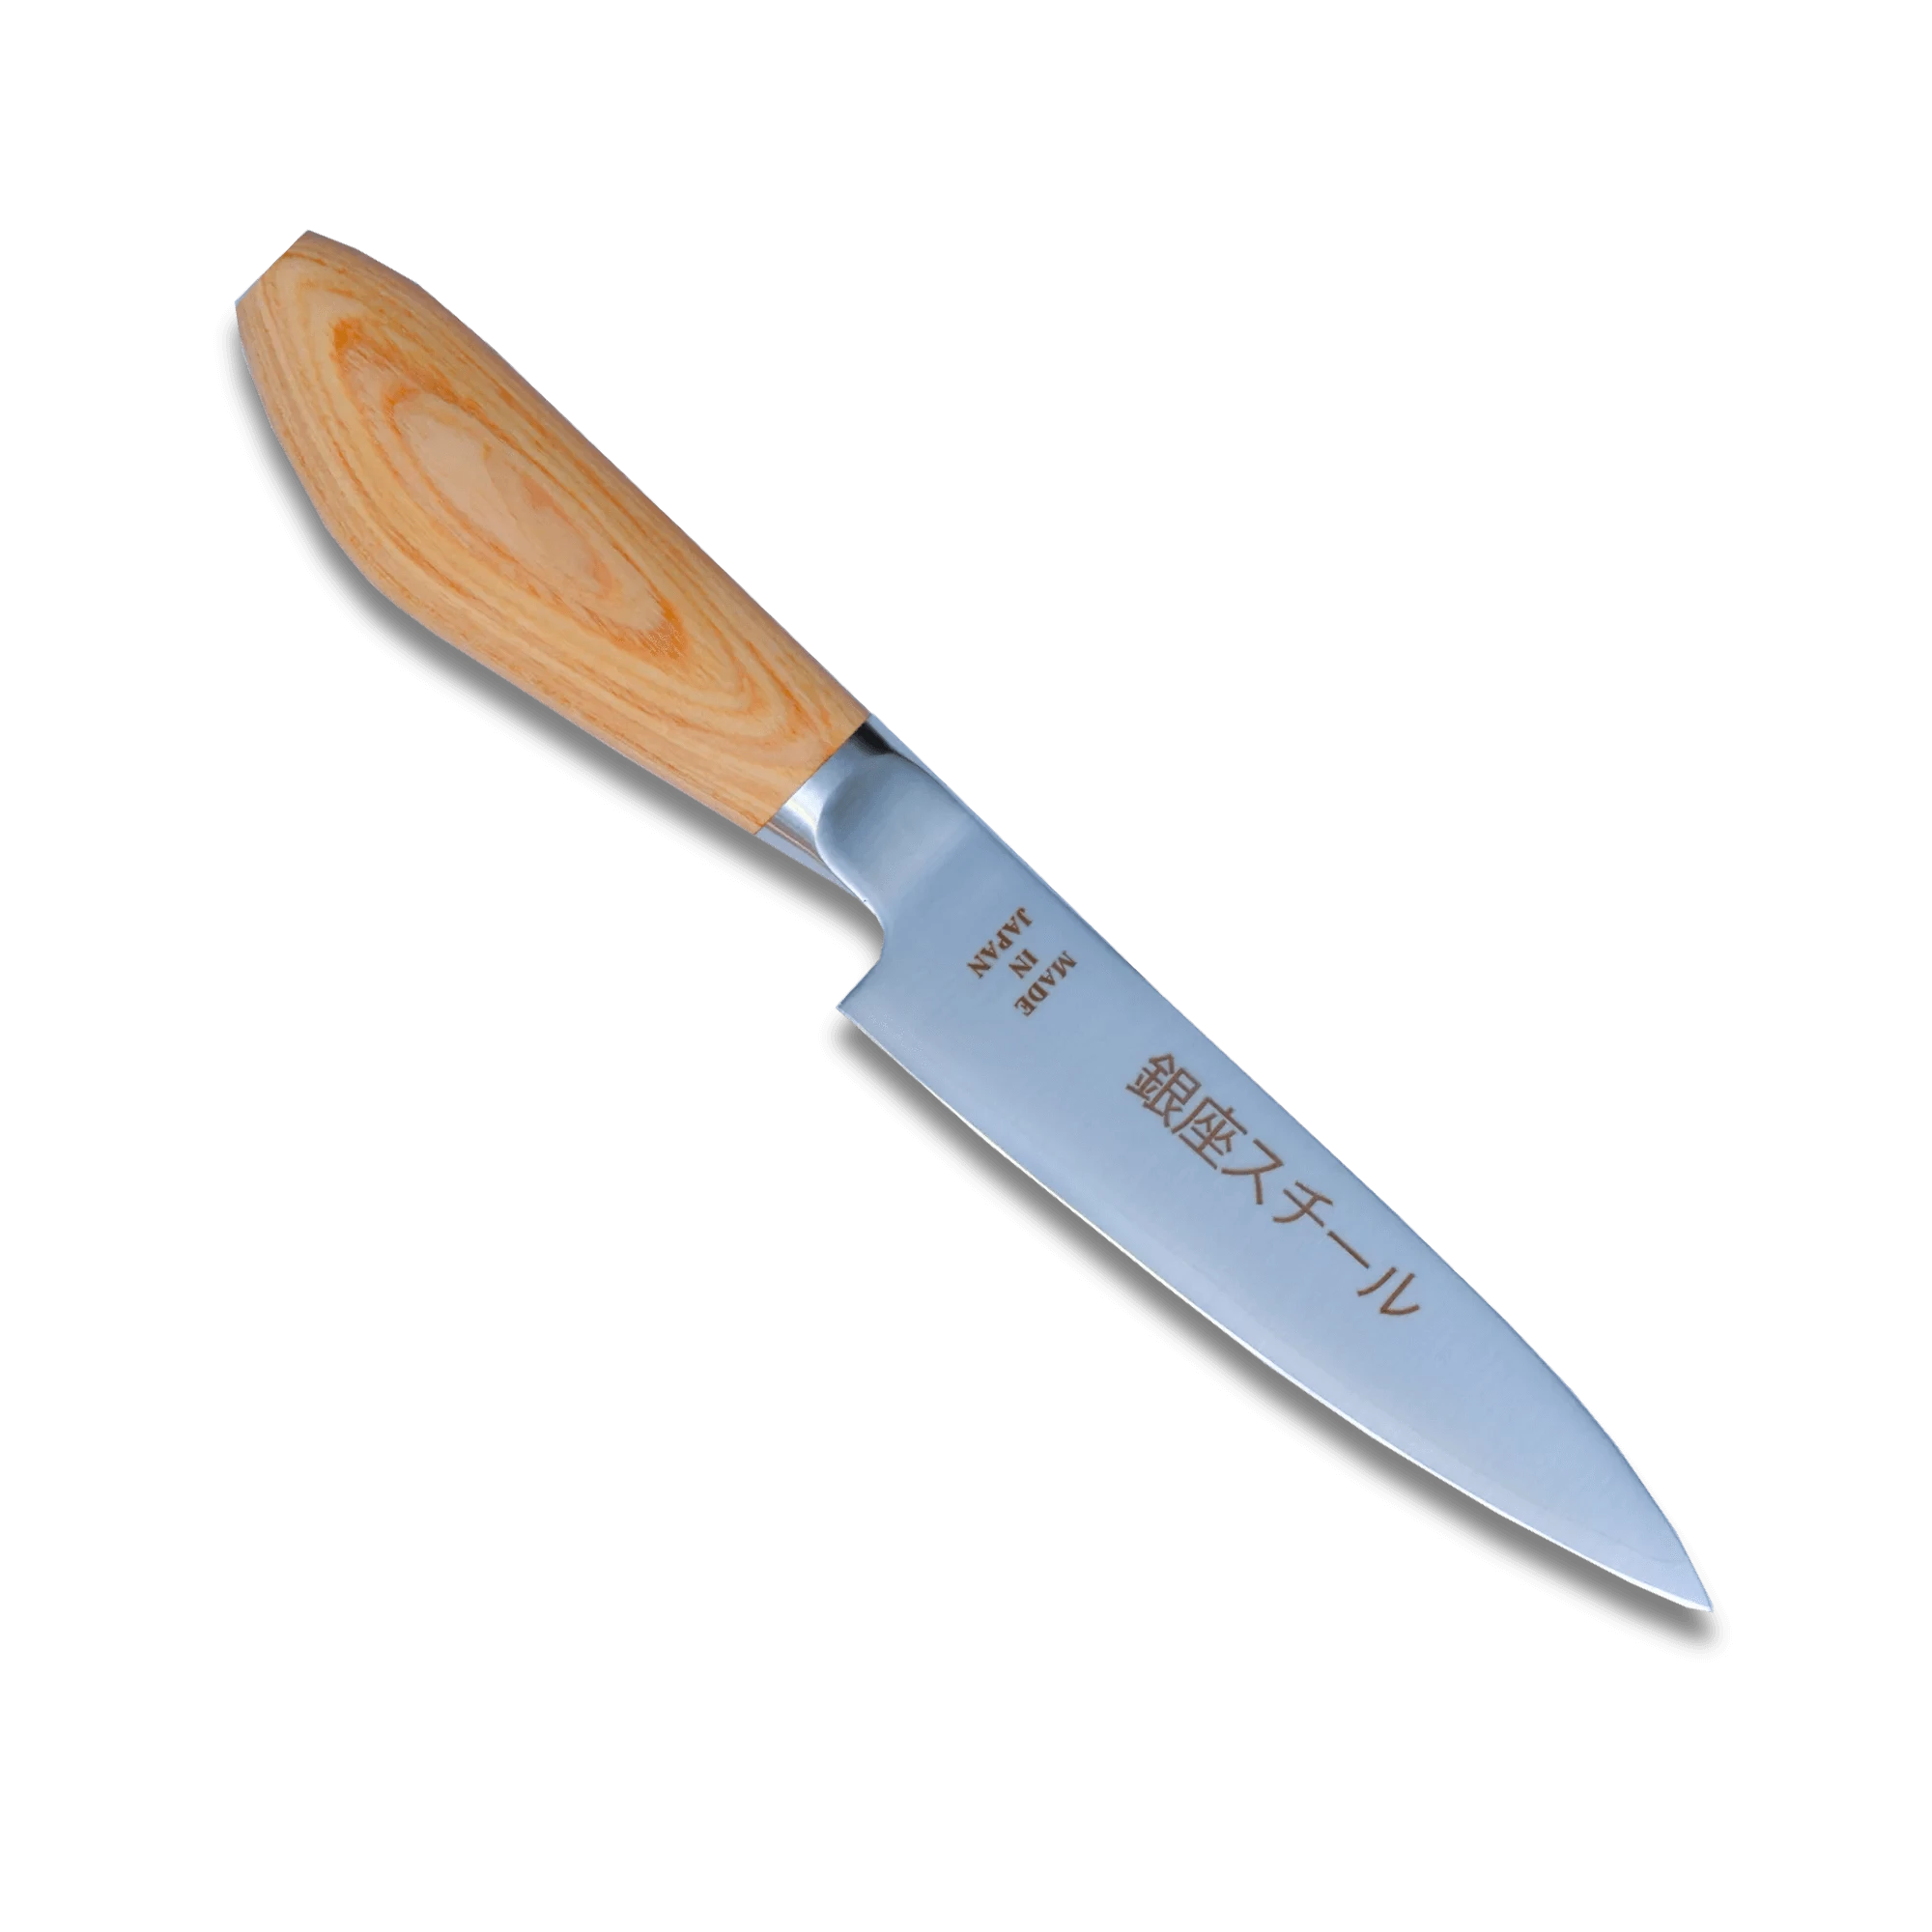 MATSUE 130 - MV Stainless Steel Petty Knife 130mm/Natural Wood Handle